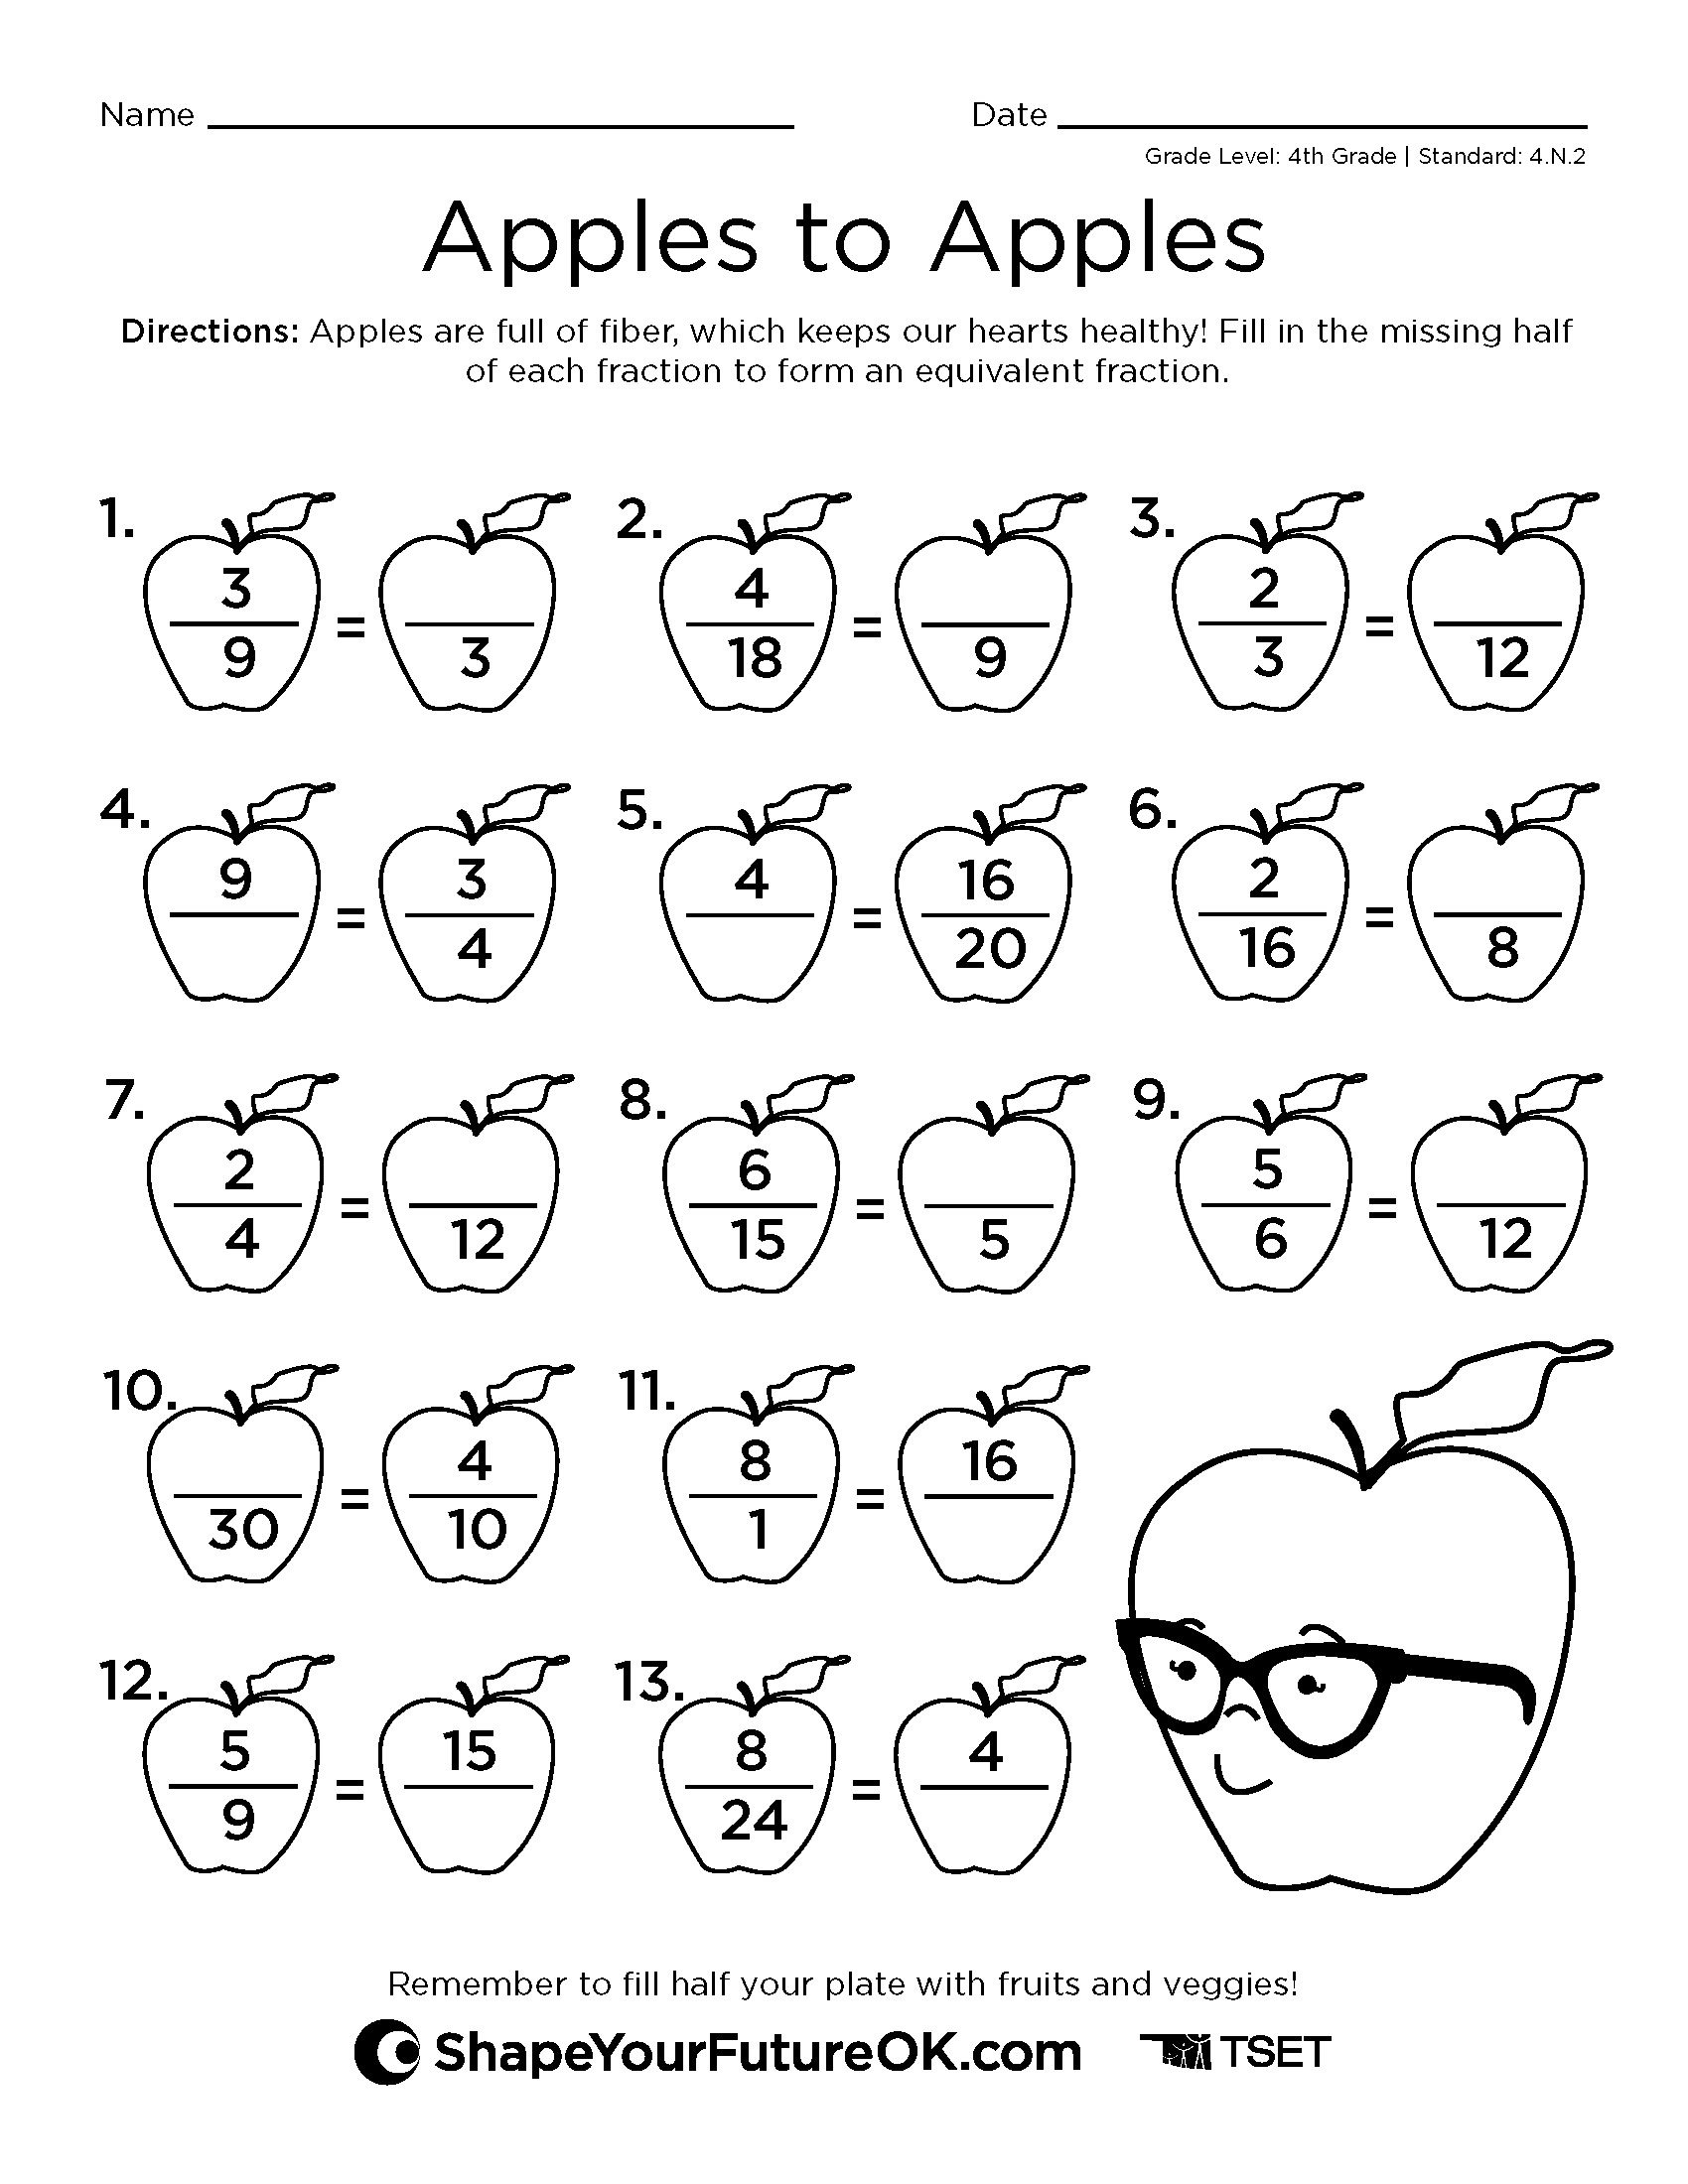 Apples to Apples: 4th Grade download